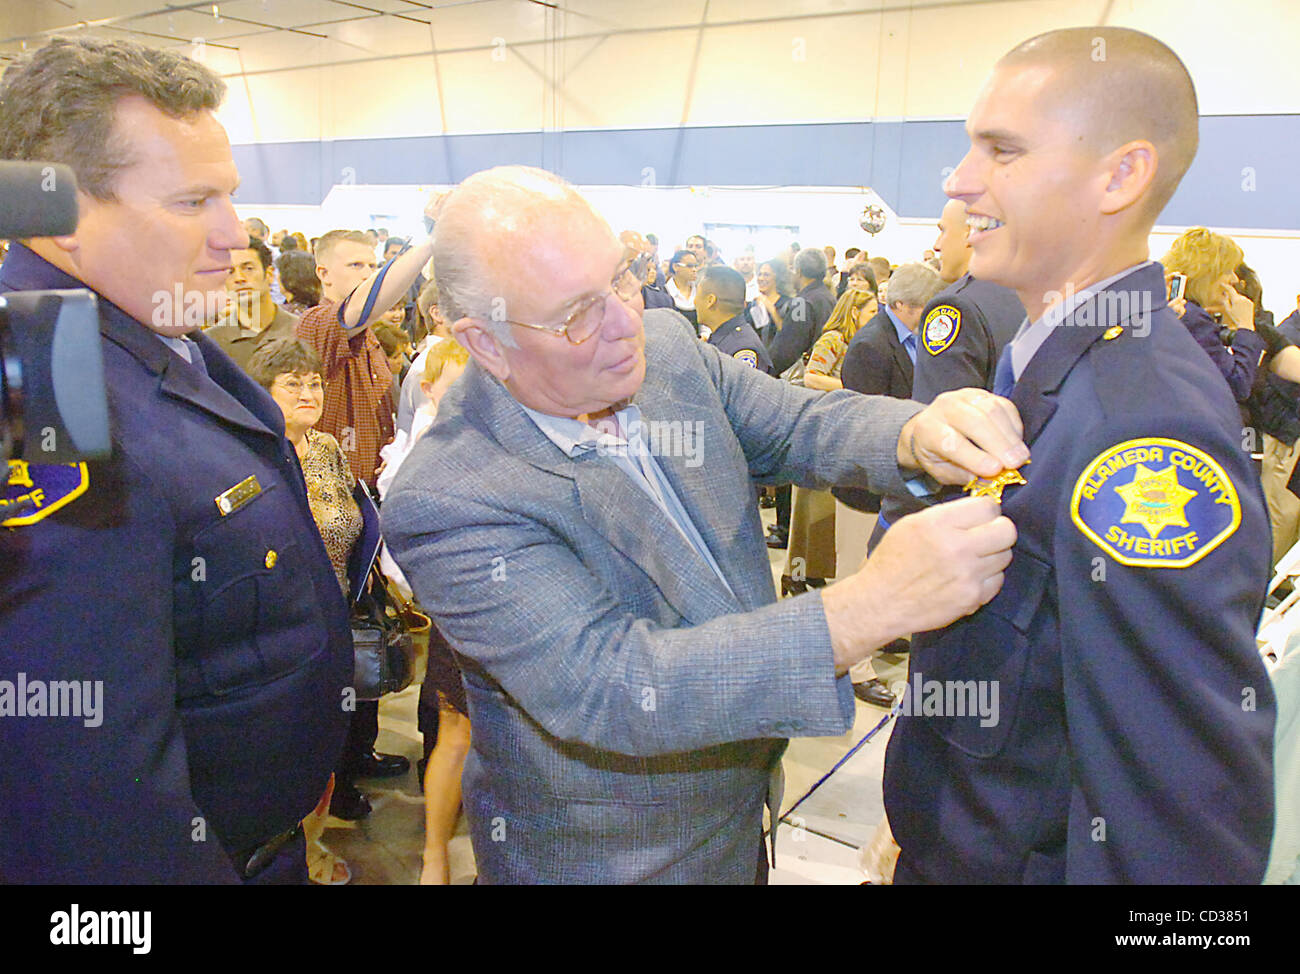 Bud Harlan, center, pins a star on his biological grandson Geoffrey Ball after Ball is sworn in as a member of the Alameda County Sheriff's Department on Friday, April 18, 2008 in a ceremony at the Alameda County Fairgrounds in Pleasanton, Calif. Ball's biological uncle Dean Stavert is at the far le Stock Photo